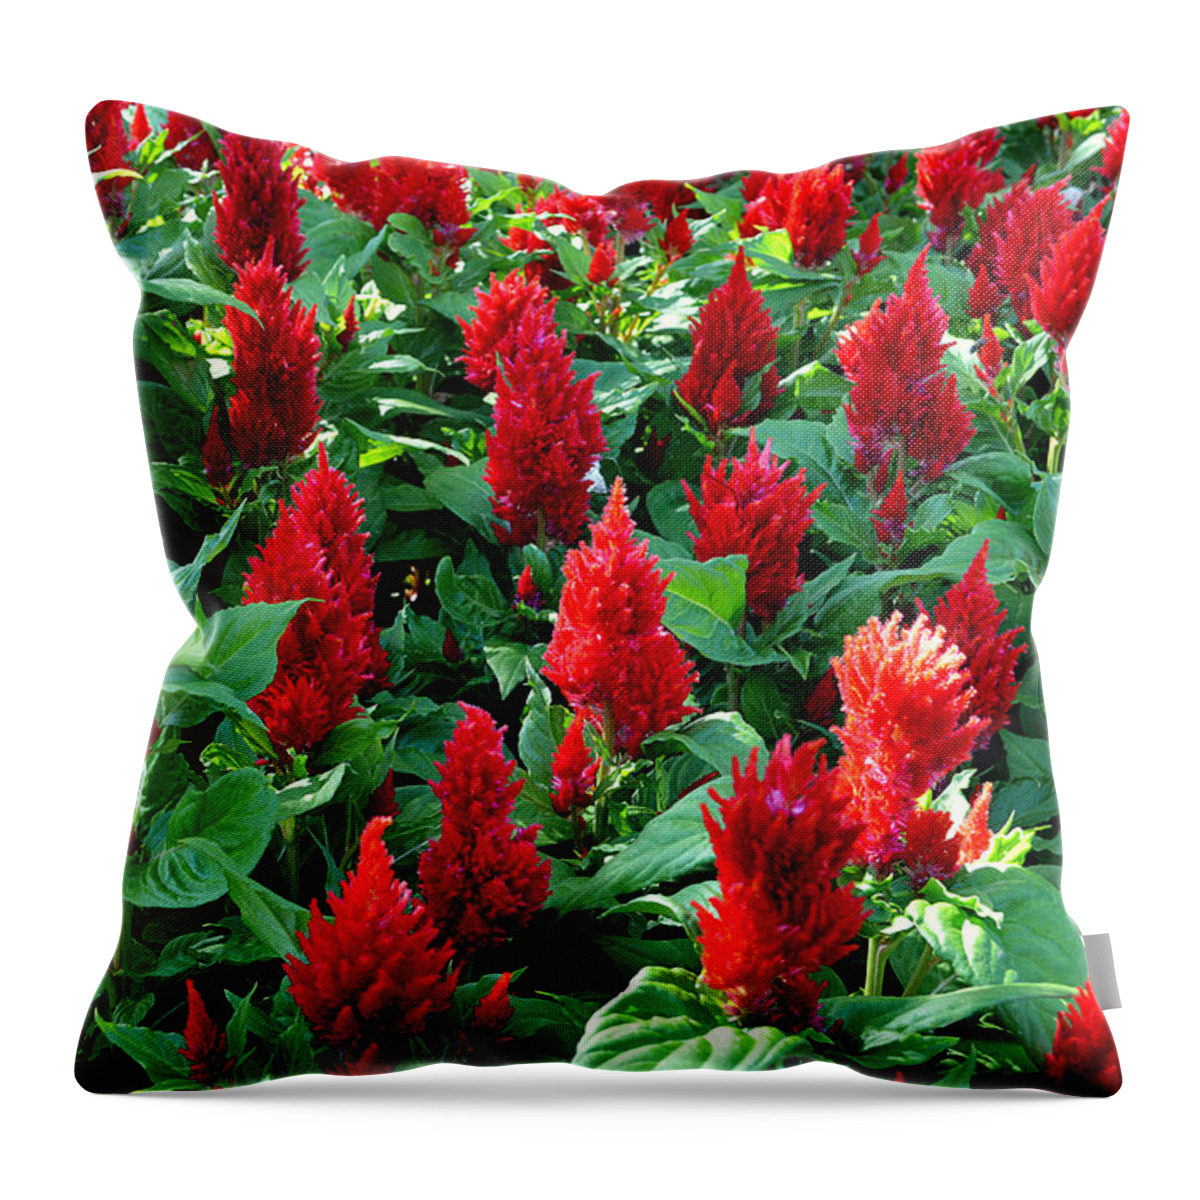 Red Celosia Throw Pillow featuring the photograph Red Celosia Garden by Glenn McCarthy Art and Photography